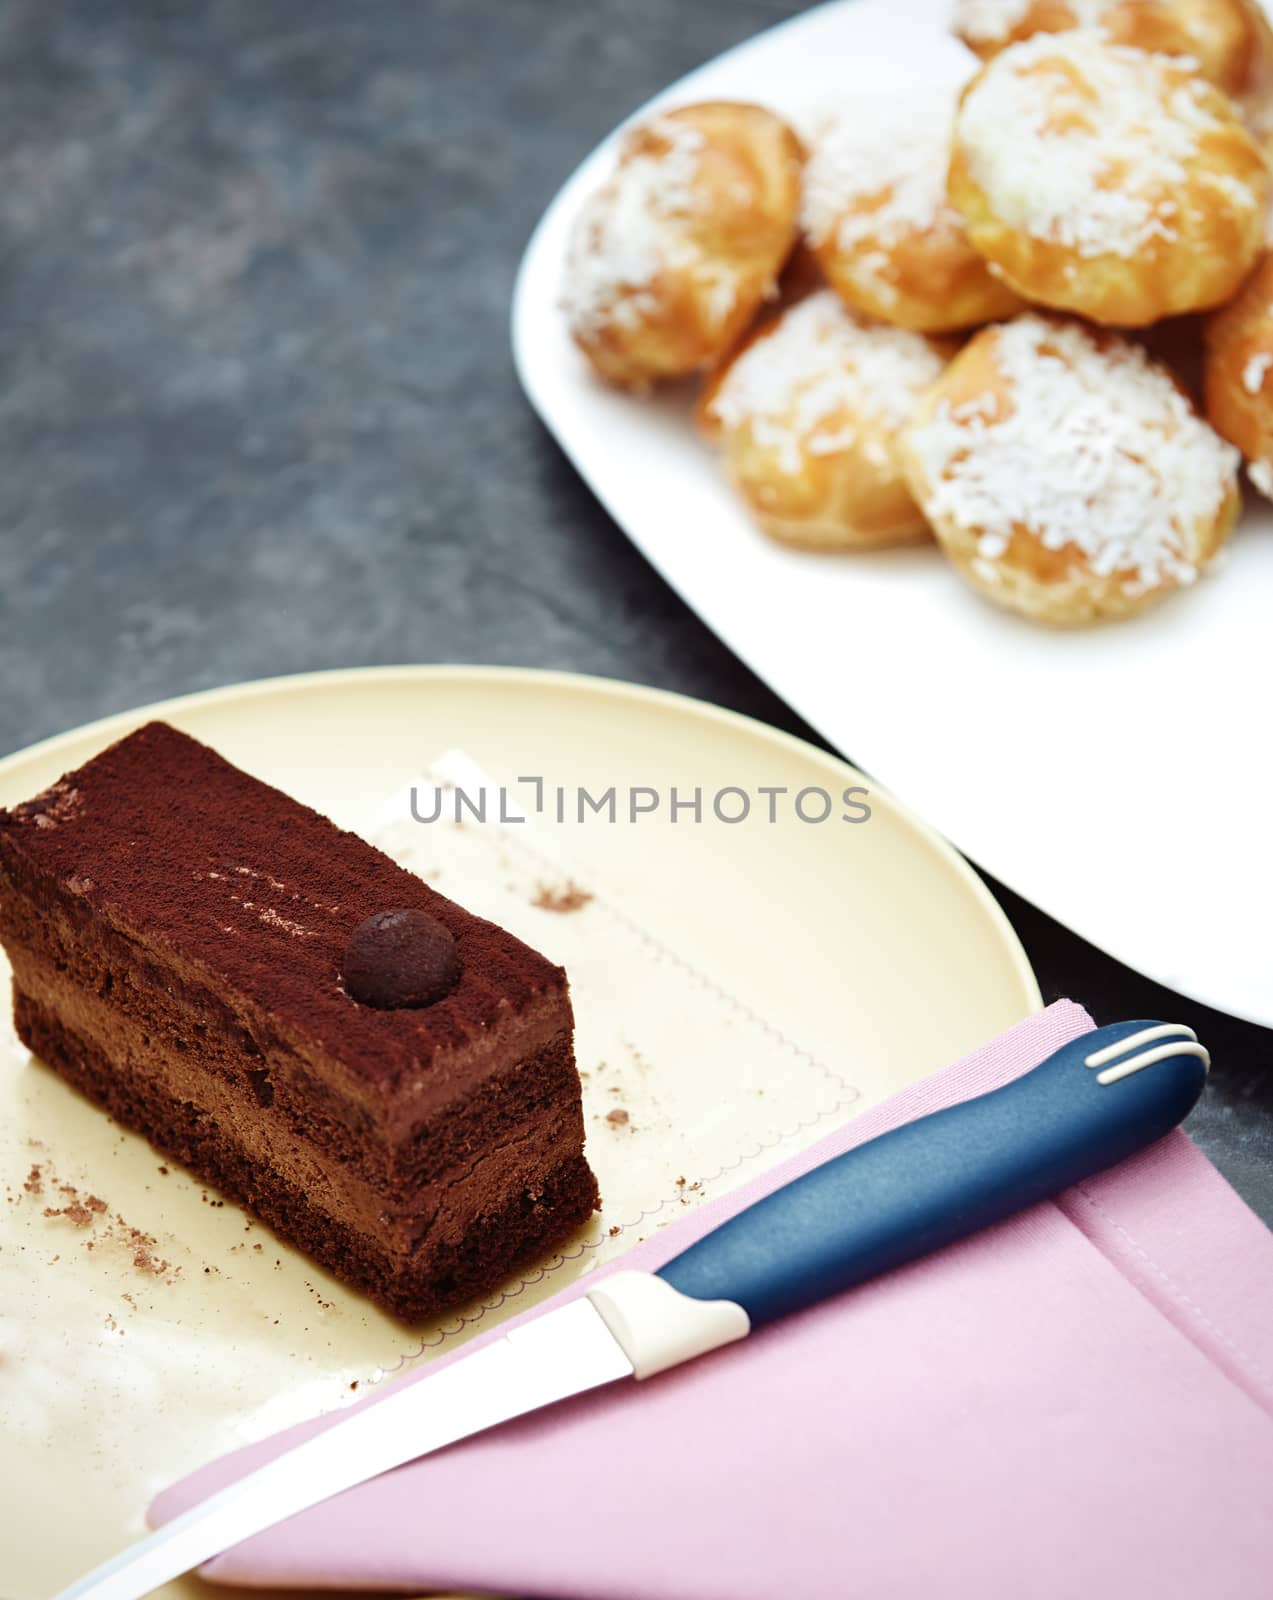 Chocolate cake and eclairs by Novic